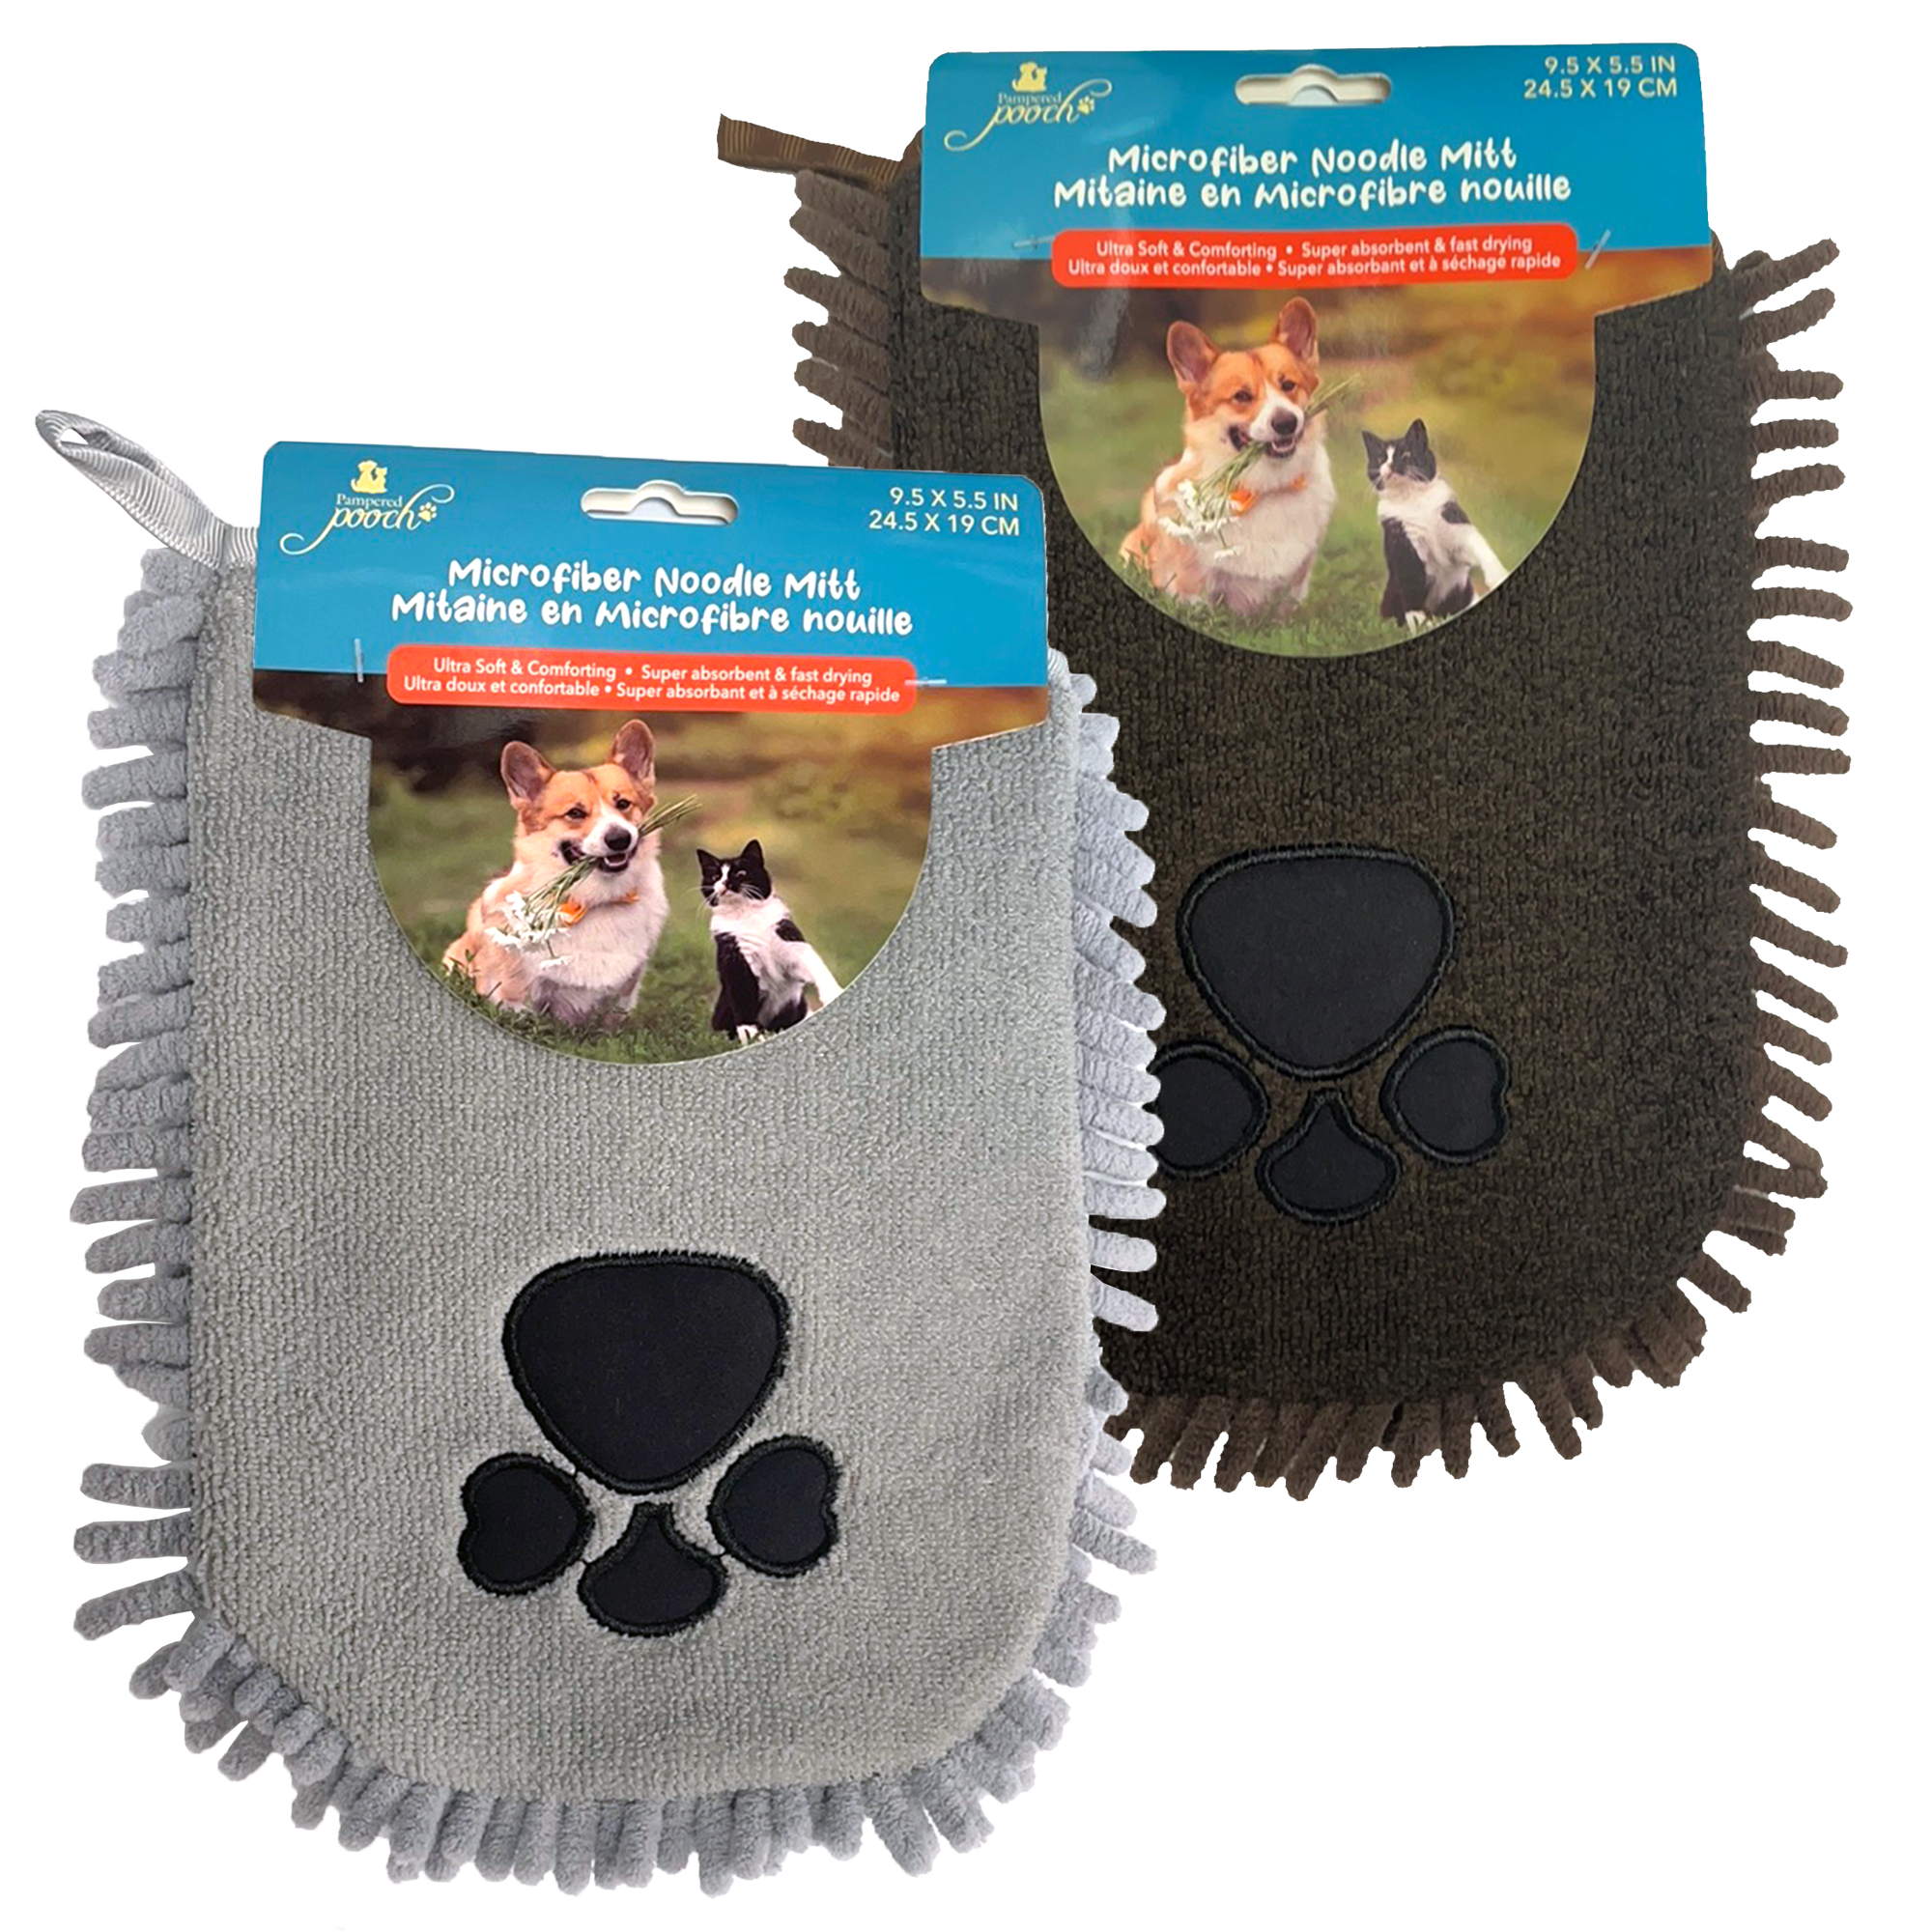 Pampered Pooch Microfiber Noodle Mitt Super Absorbent and Fast Drying